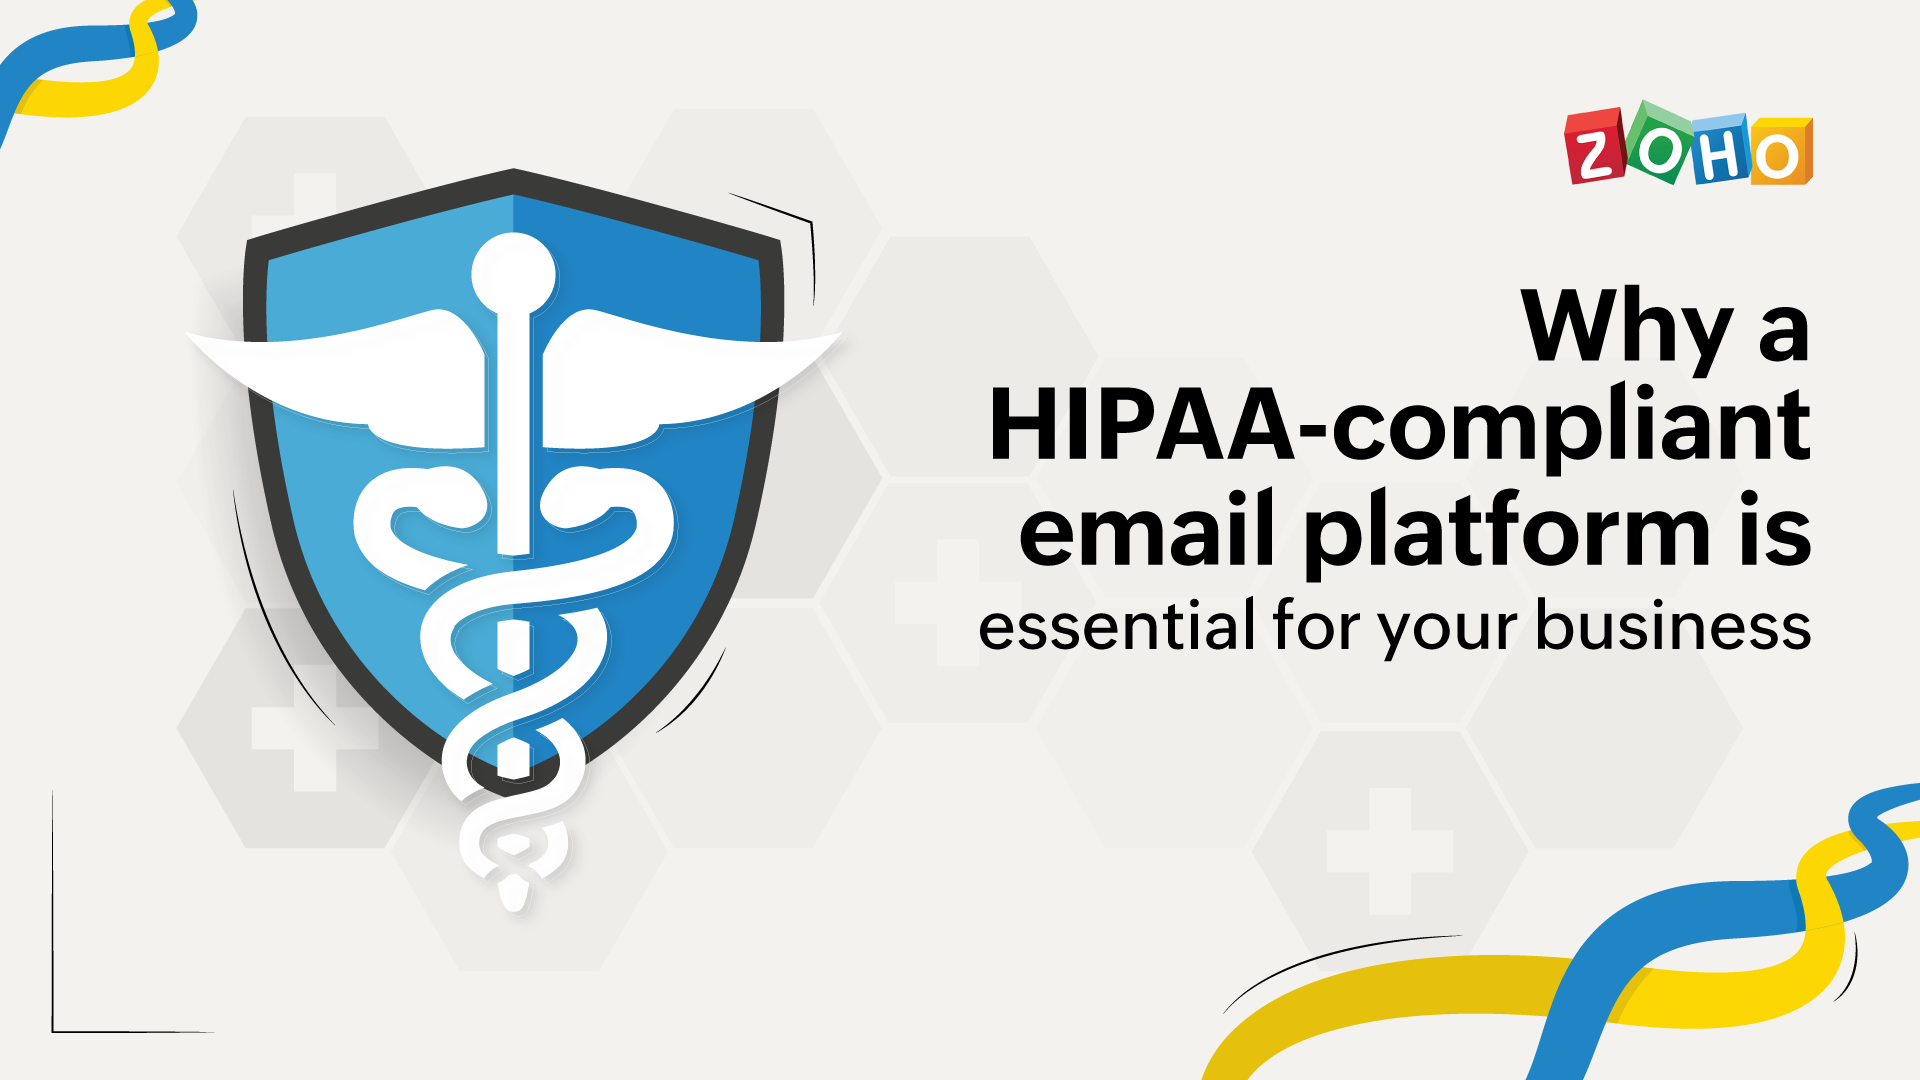 Why HIPAA compliant email is essential for your business